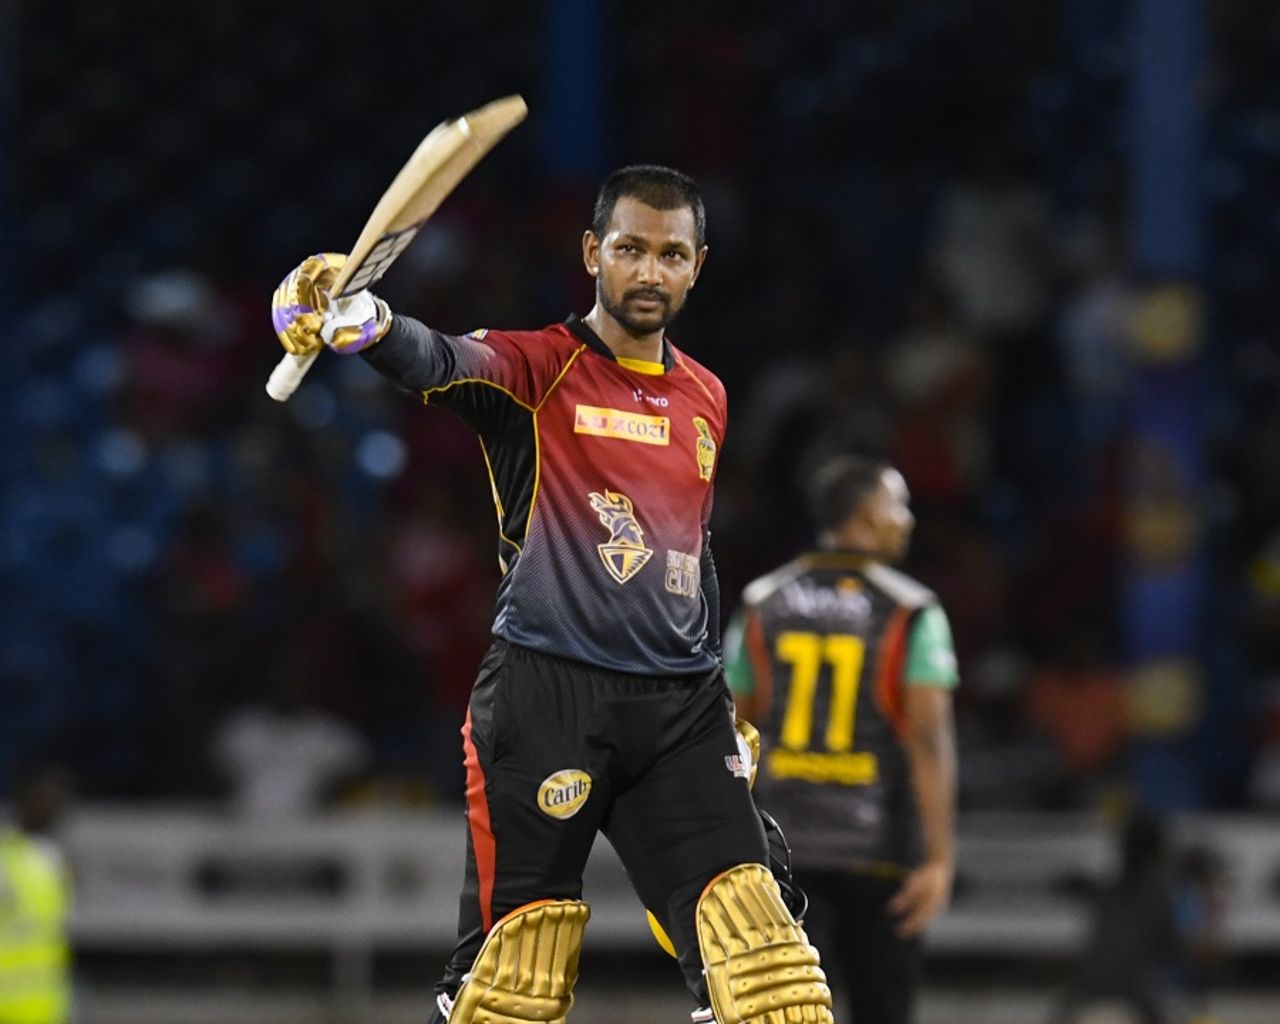 Denesh Ramdin celebrates his fifty, Trinbago Knight Riders v St Kitts and Nevis Patriots, CPL 2017, Port of Spain, August 14, 2017